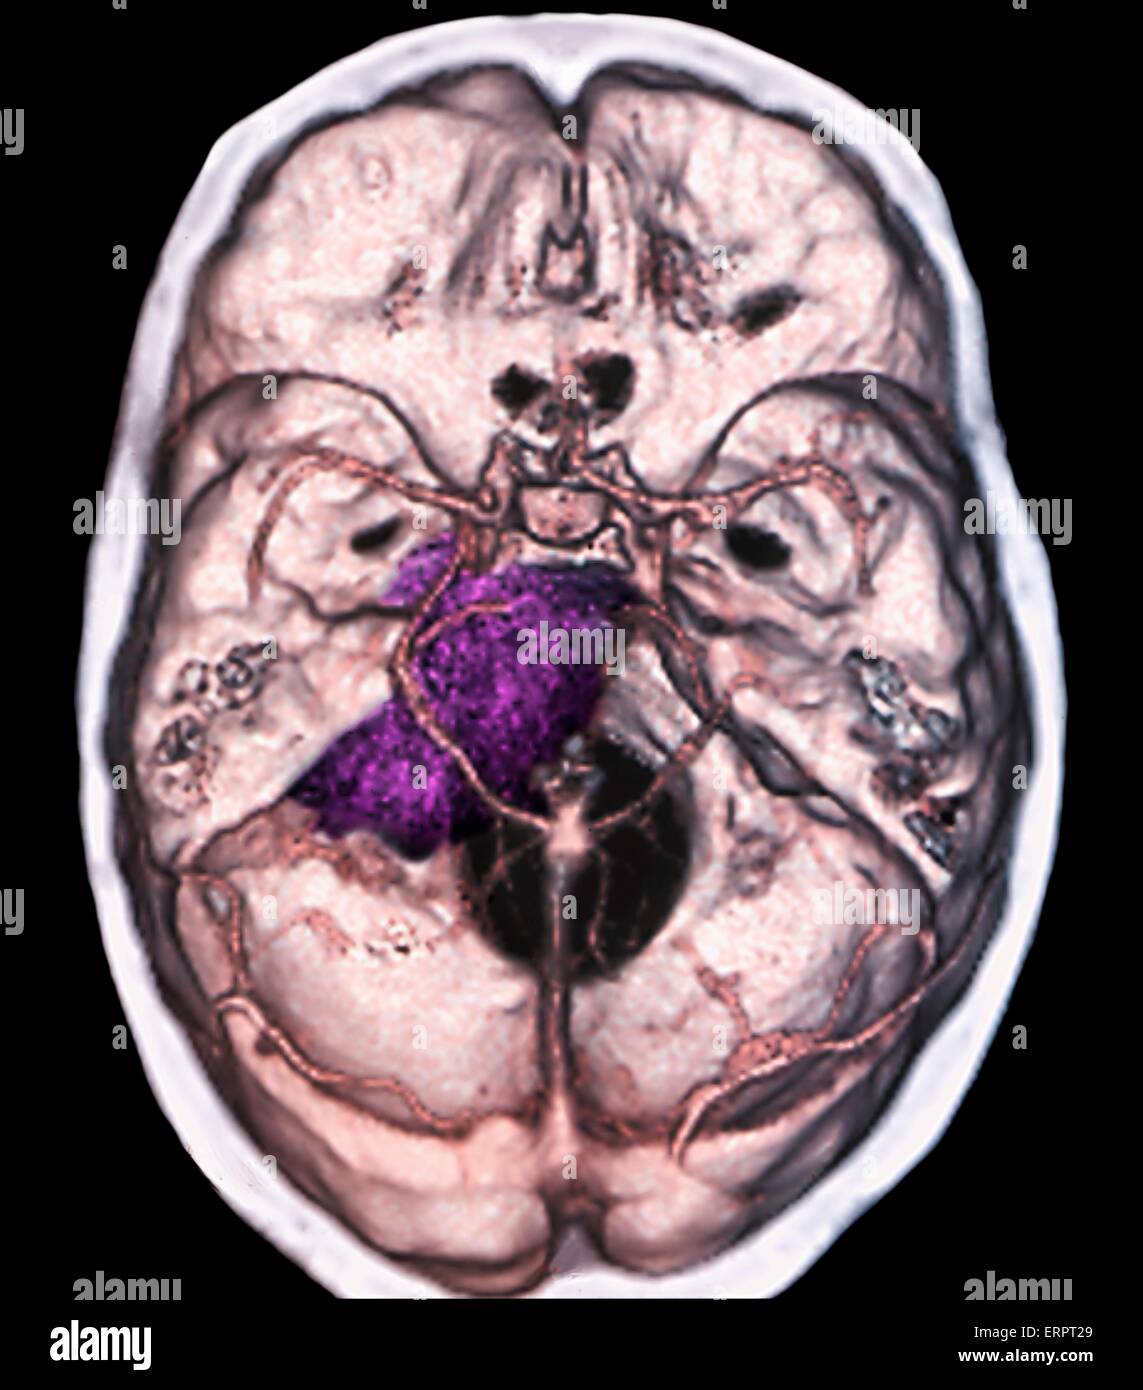 Benign brain tumour. Coloured computed tomography (CT) scan of the brain of a 48 year old patient with a meningioma (purple). This is a benign (non-cancerous) tumour that arises from the meninges, the membranes that surround the brain. Stock Photo